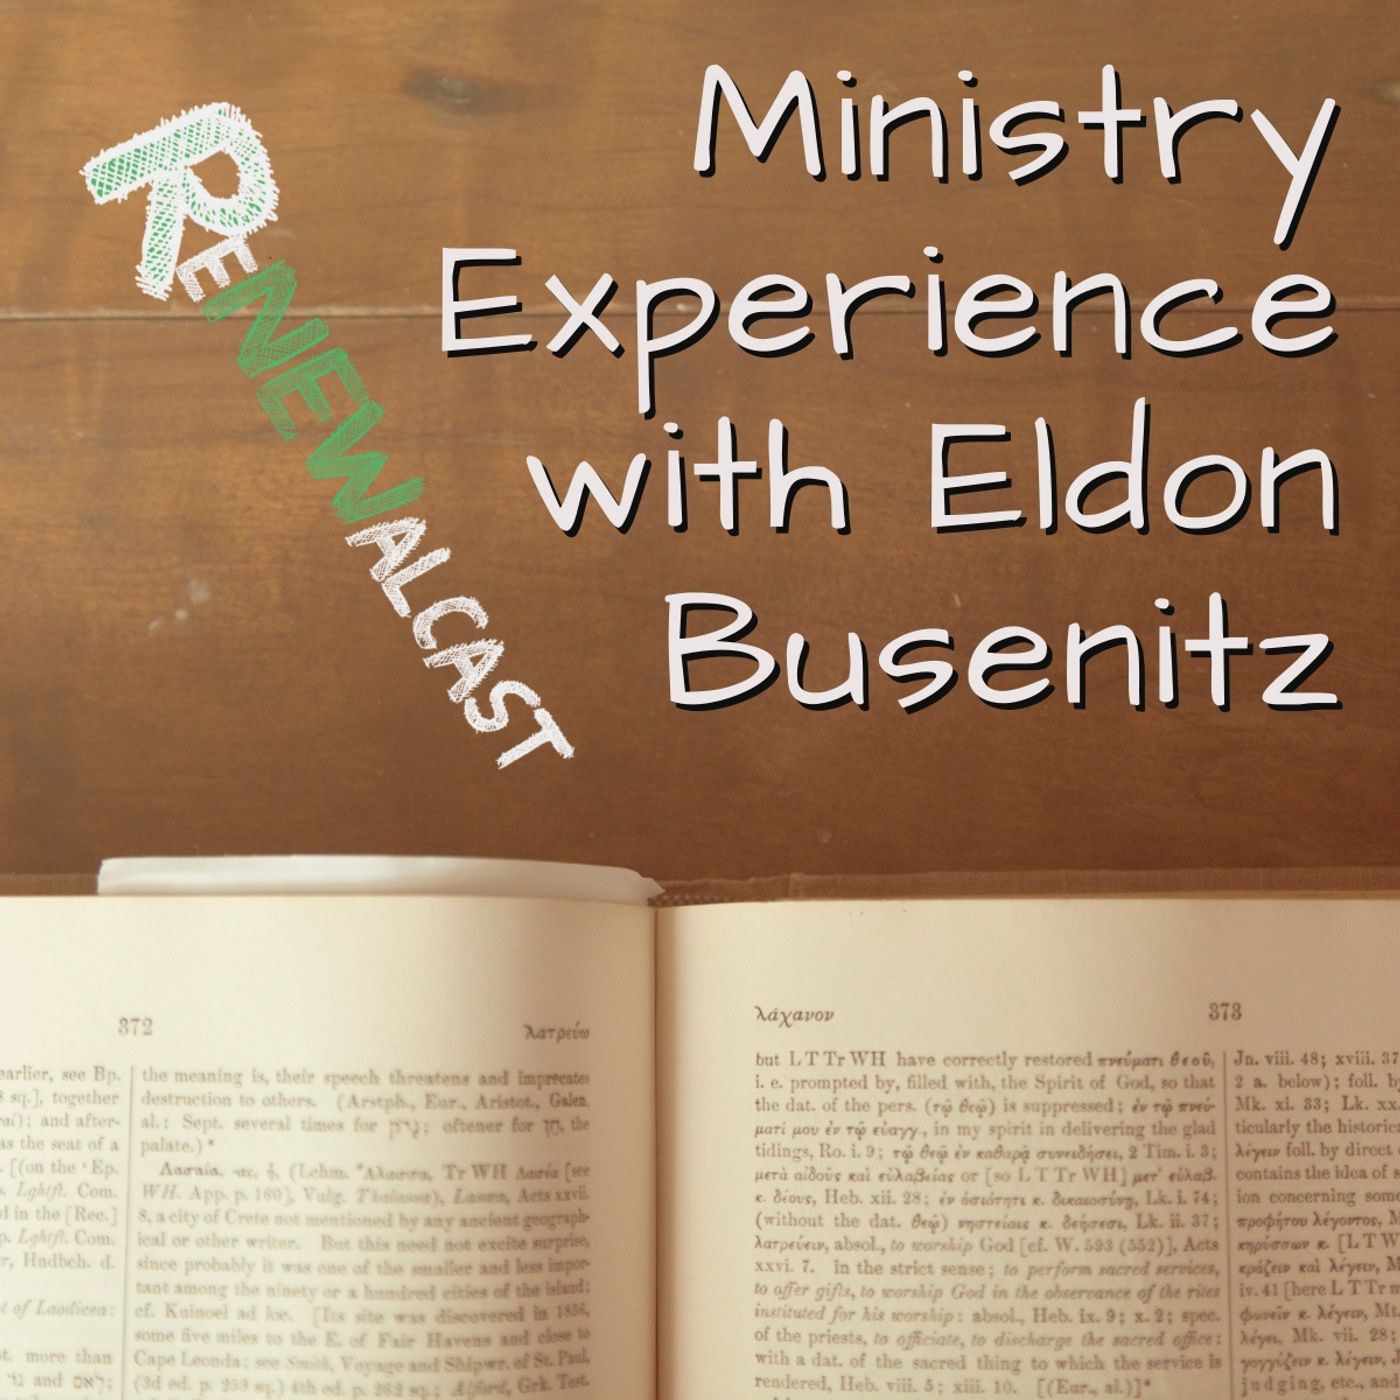 Ministry Experience with Eldon Busenitz